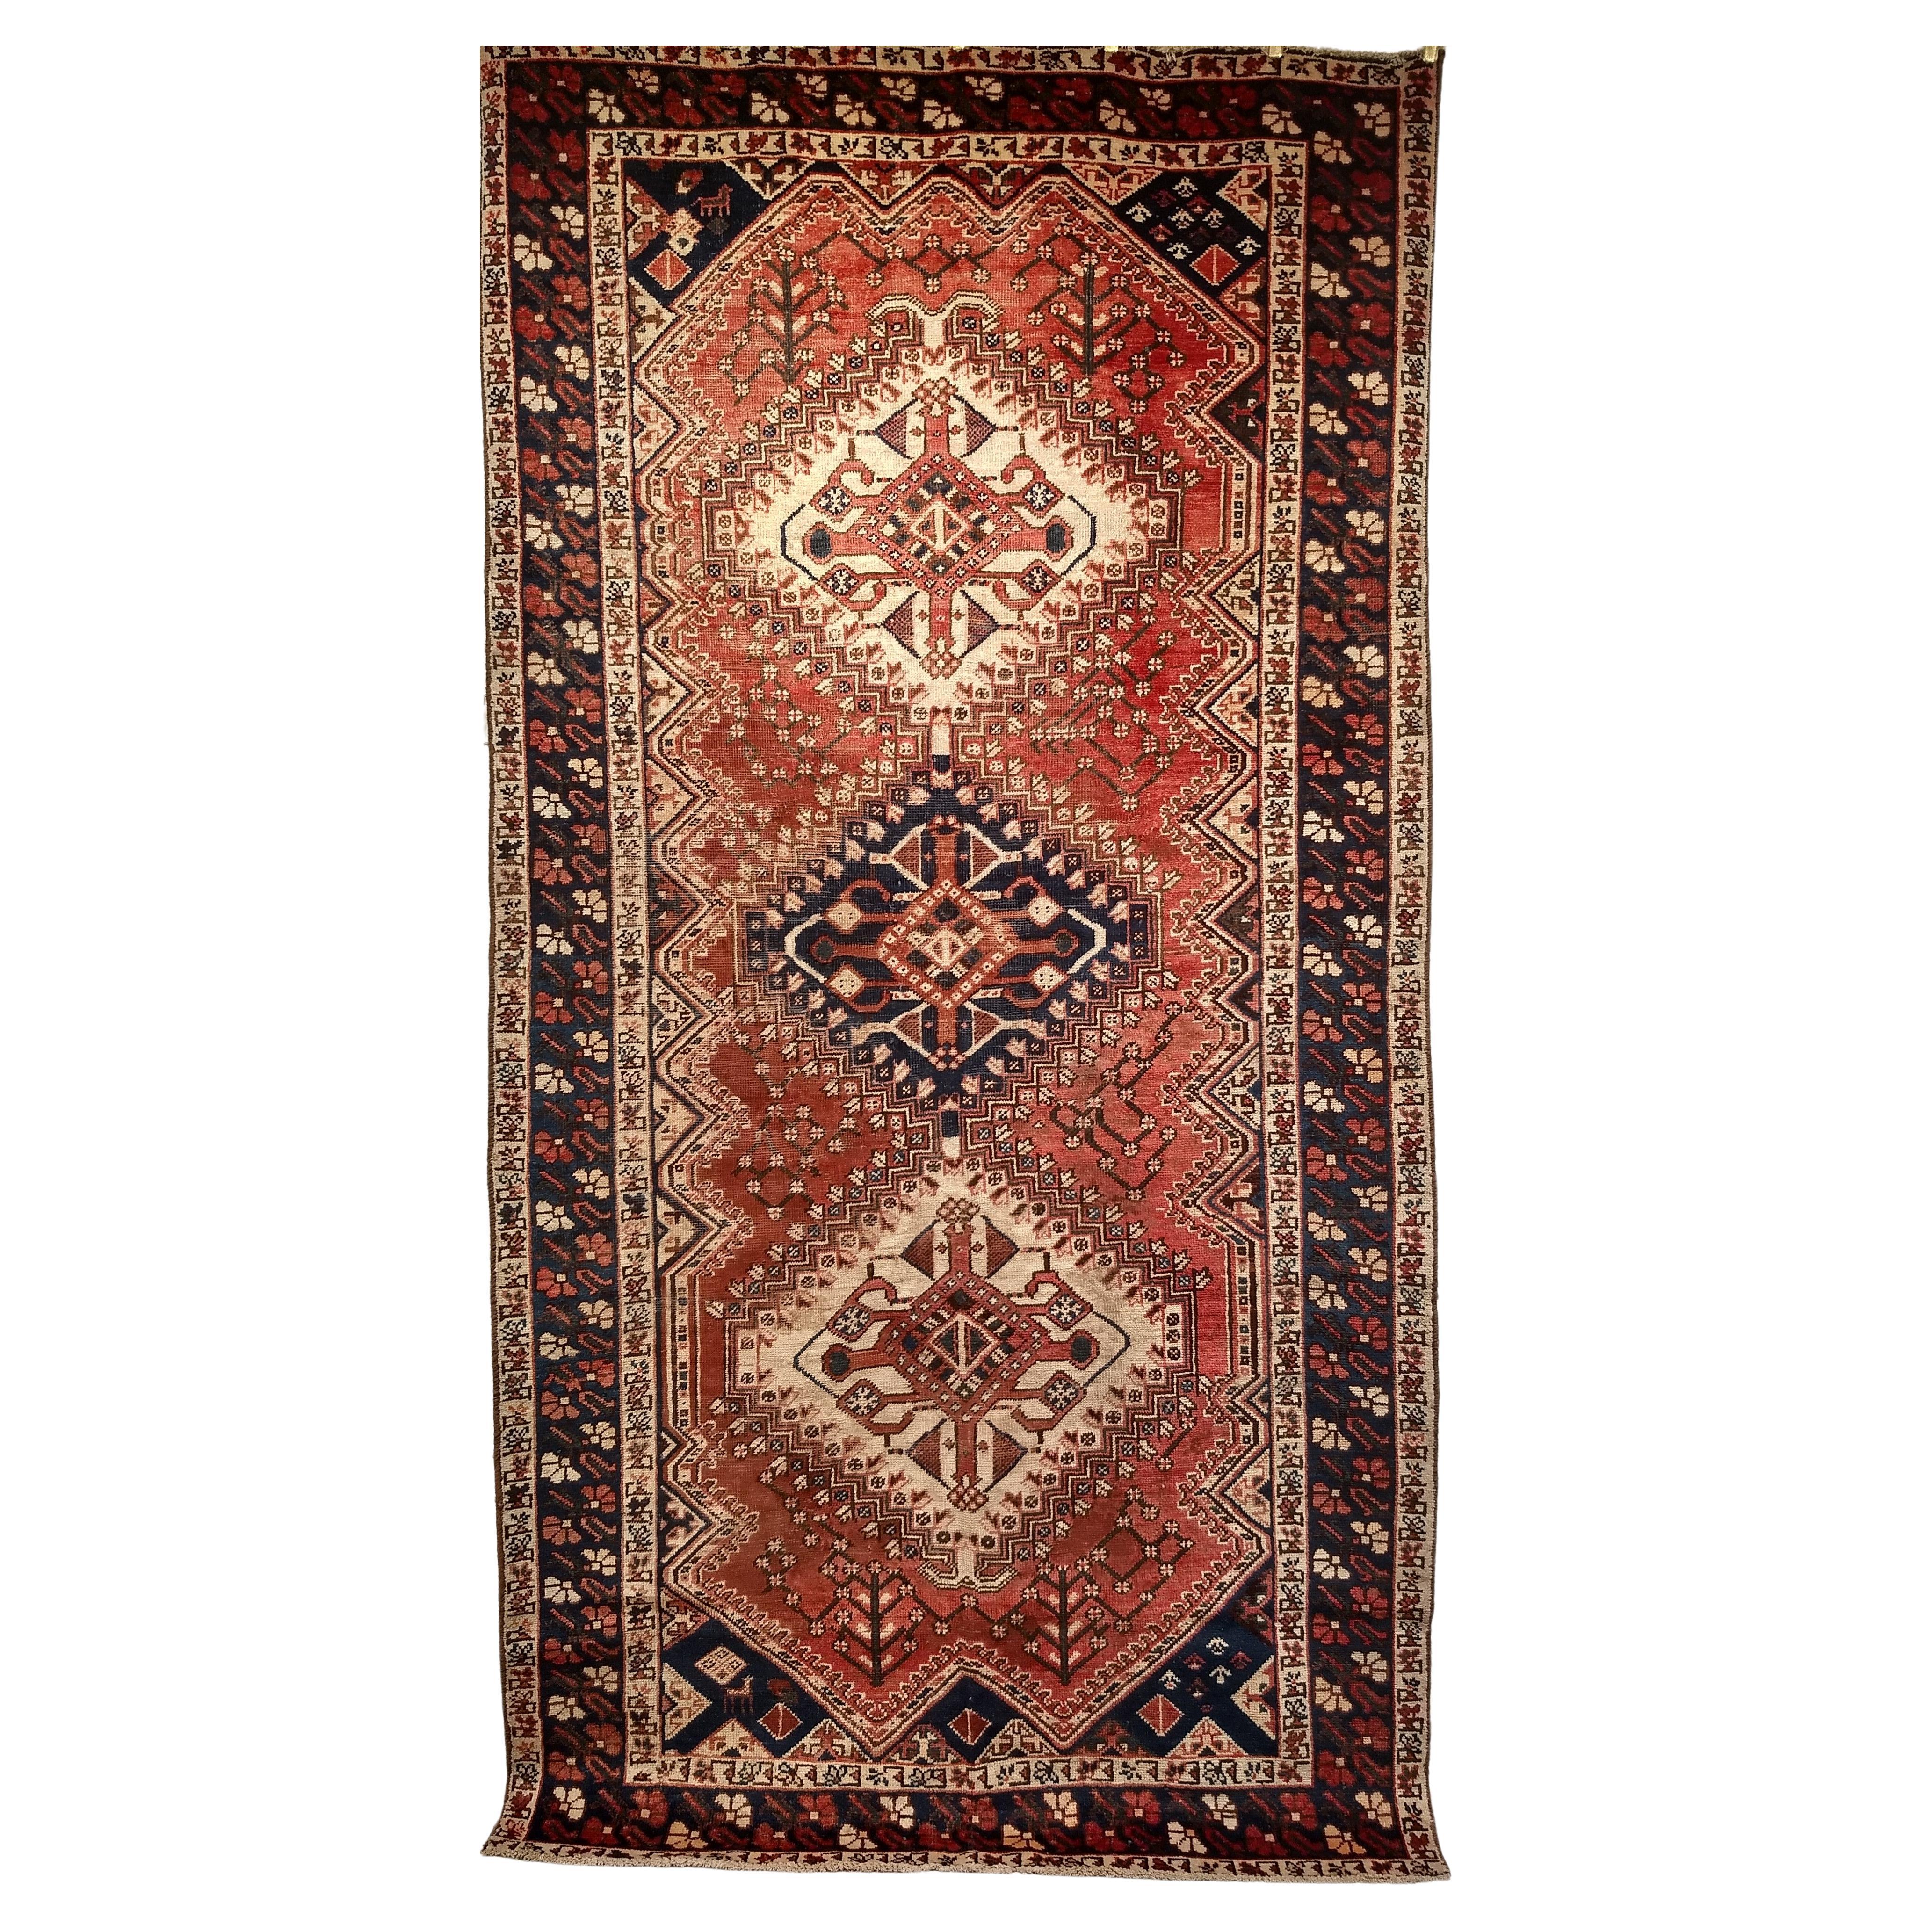 Vintage Persian Shiraz Tribal Area Rug in Rust Red, Ivory, Blue